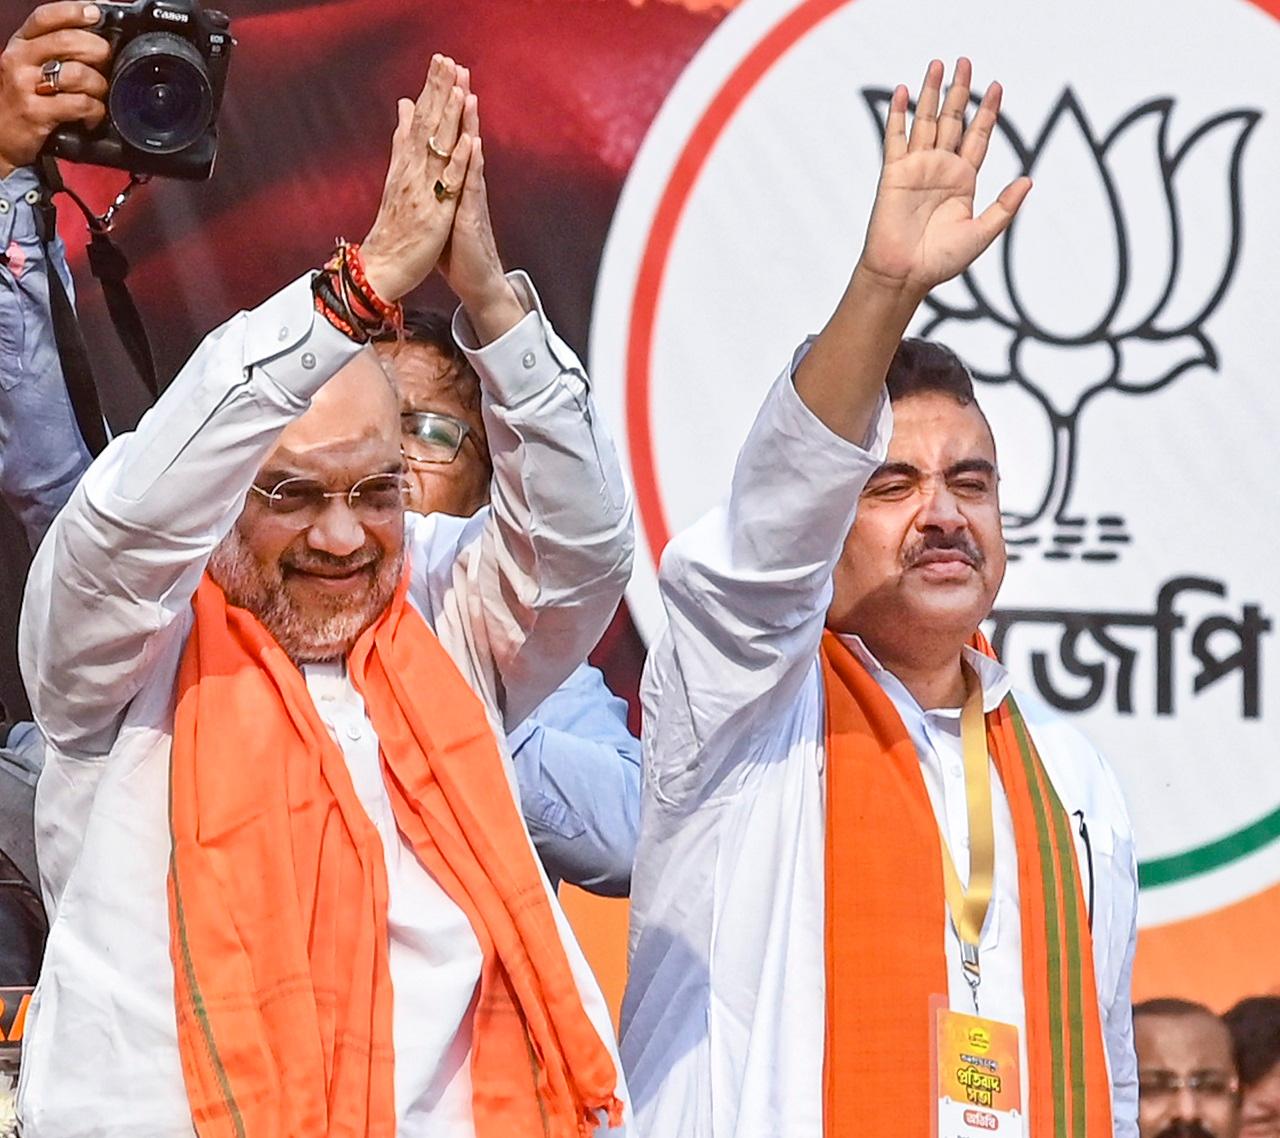 Addressing a big rally in Kolkata to launch the BJP's Lok Sabha campaign, Shah launched a blistering attack on Chief Minister Mamata Banerjee on the issues of appeasement, infiltration, corruption and political violence, alleging she has 